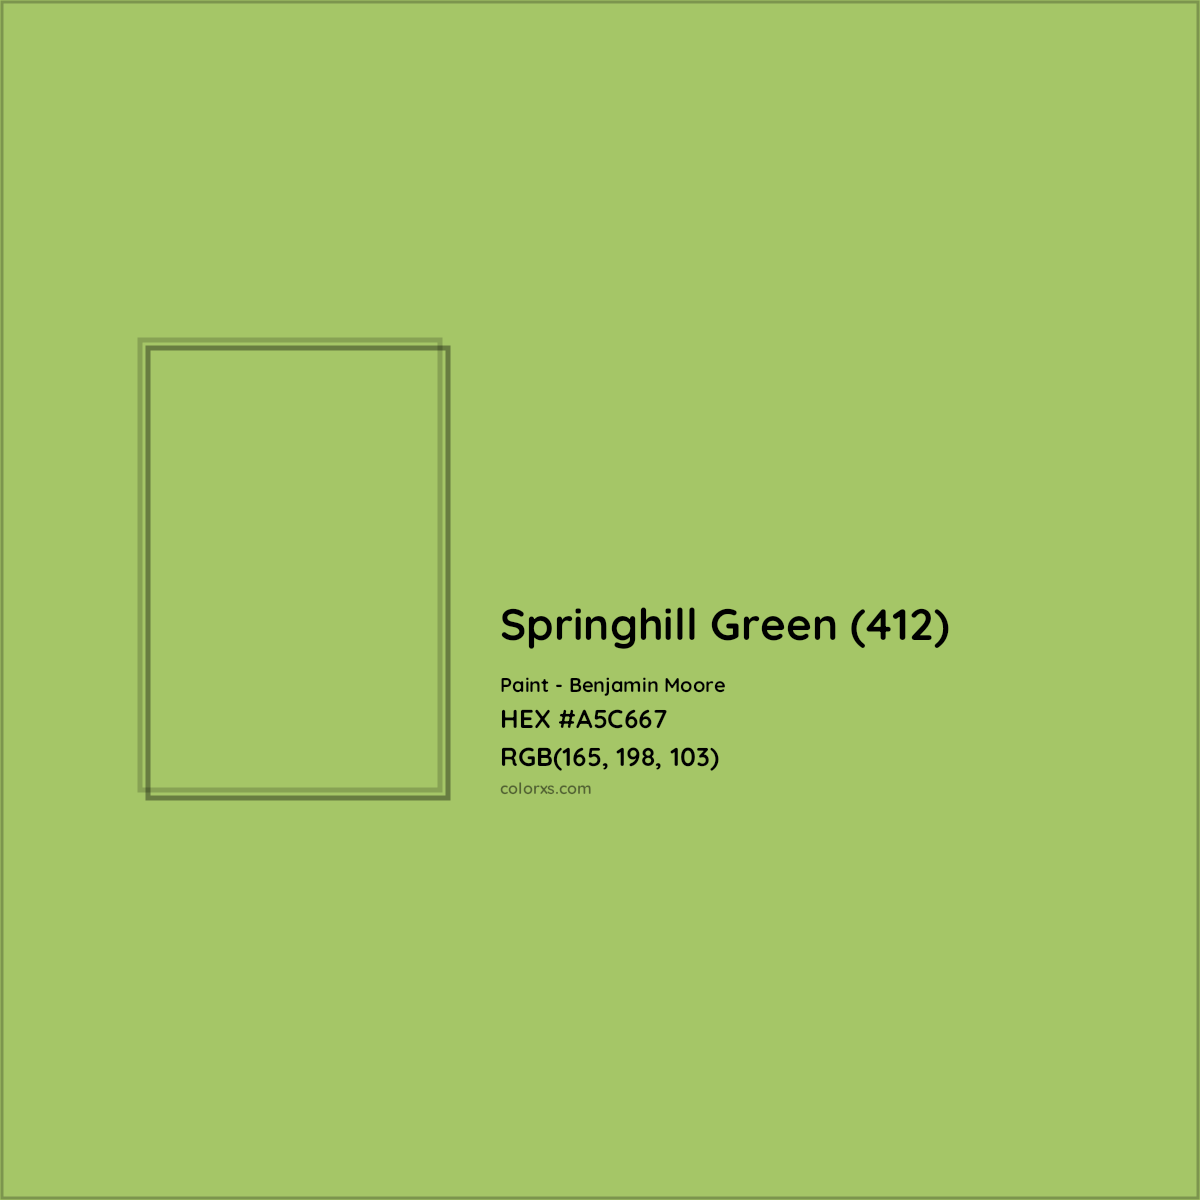 HEX #A5C667 Springhill Green (412) Paint Benjamin Moore - Color Code